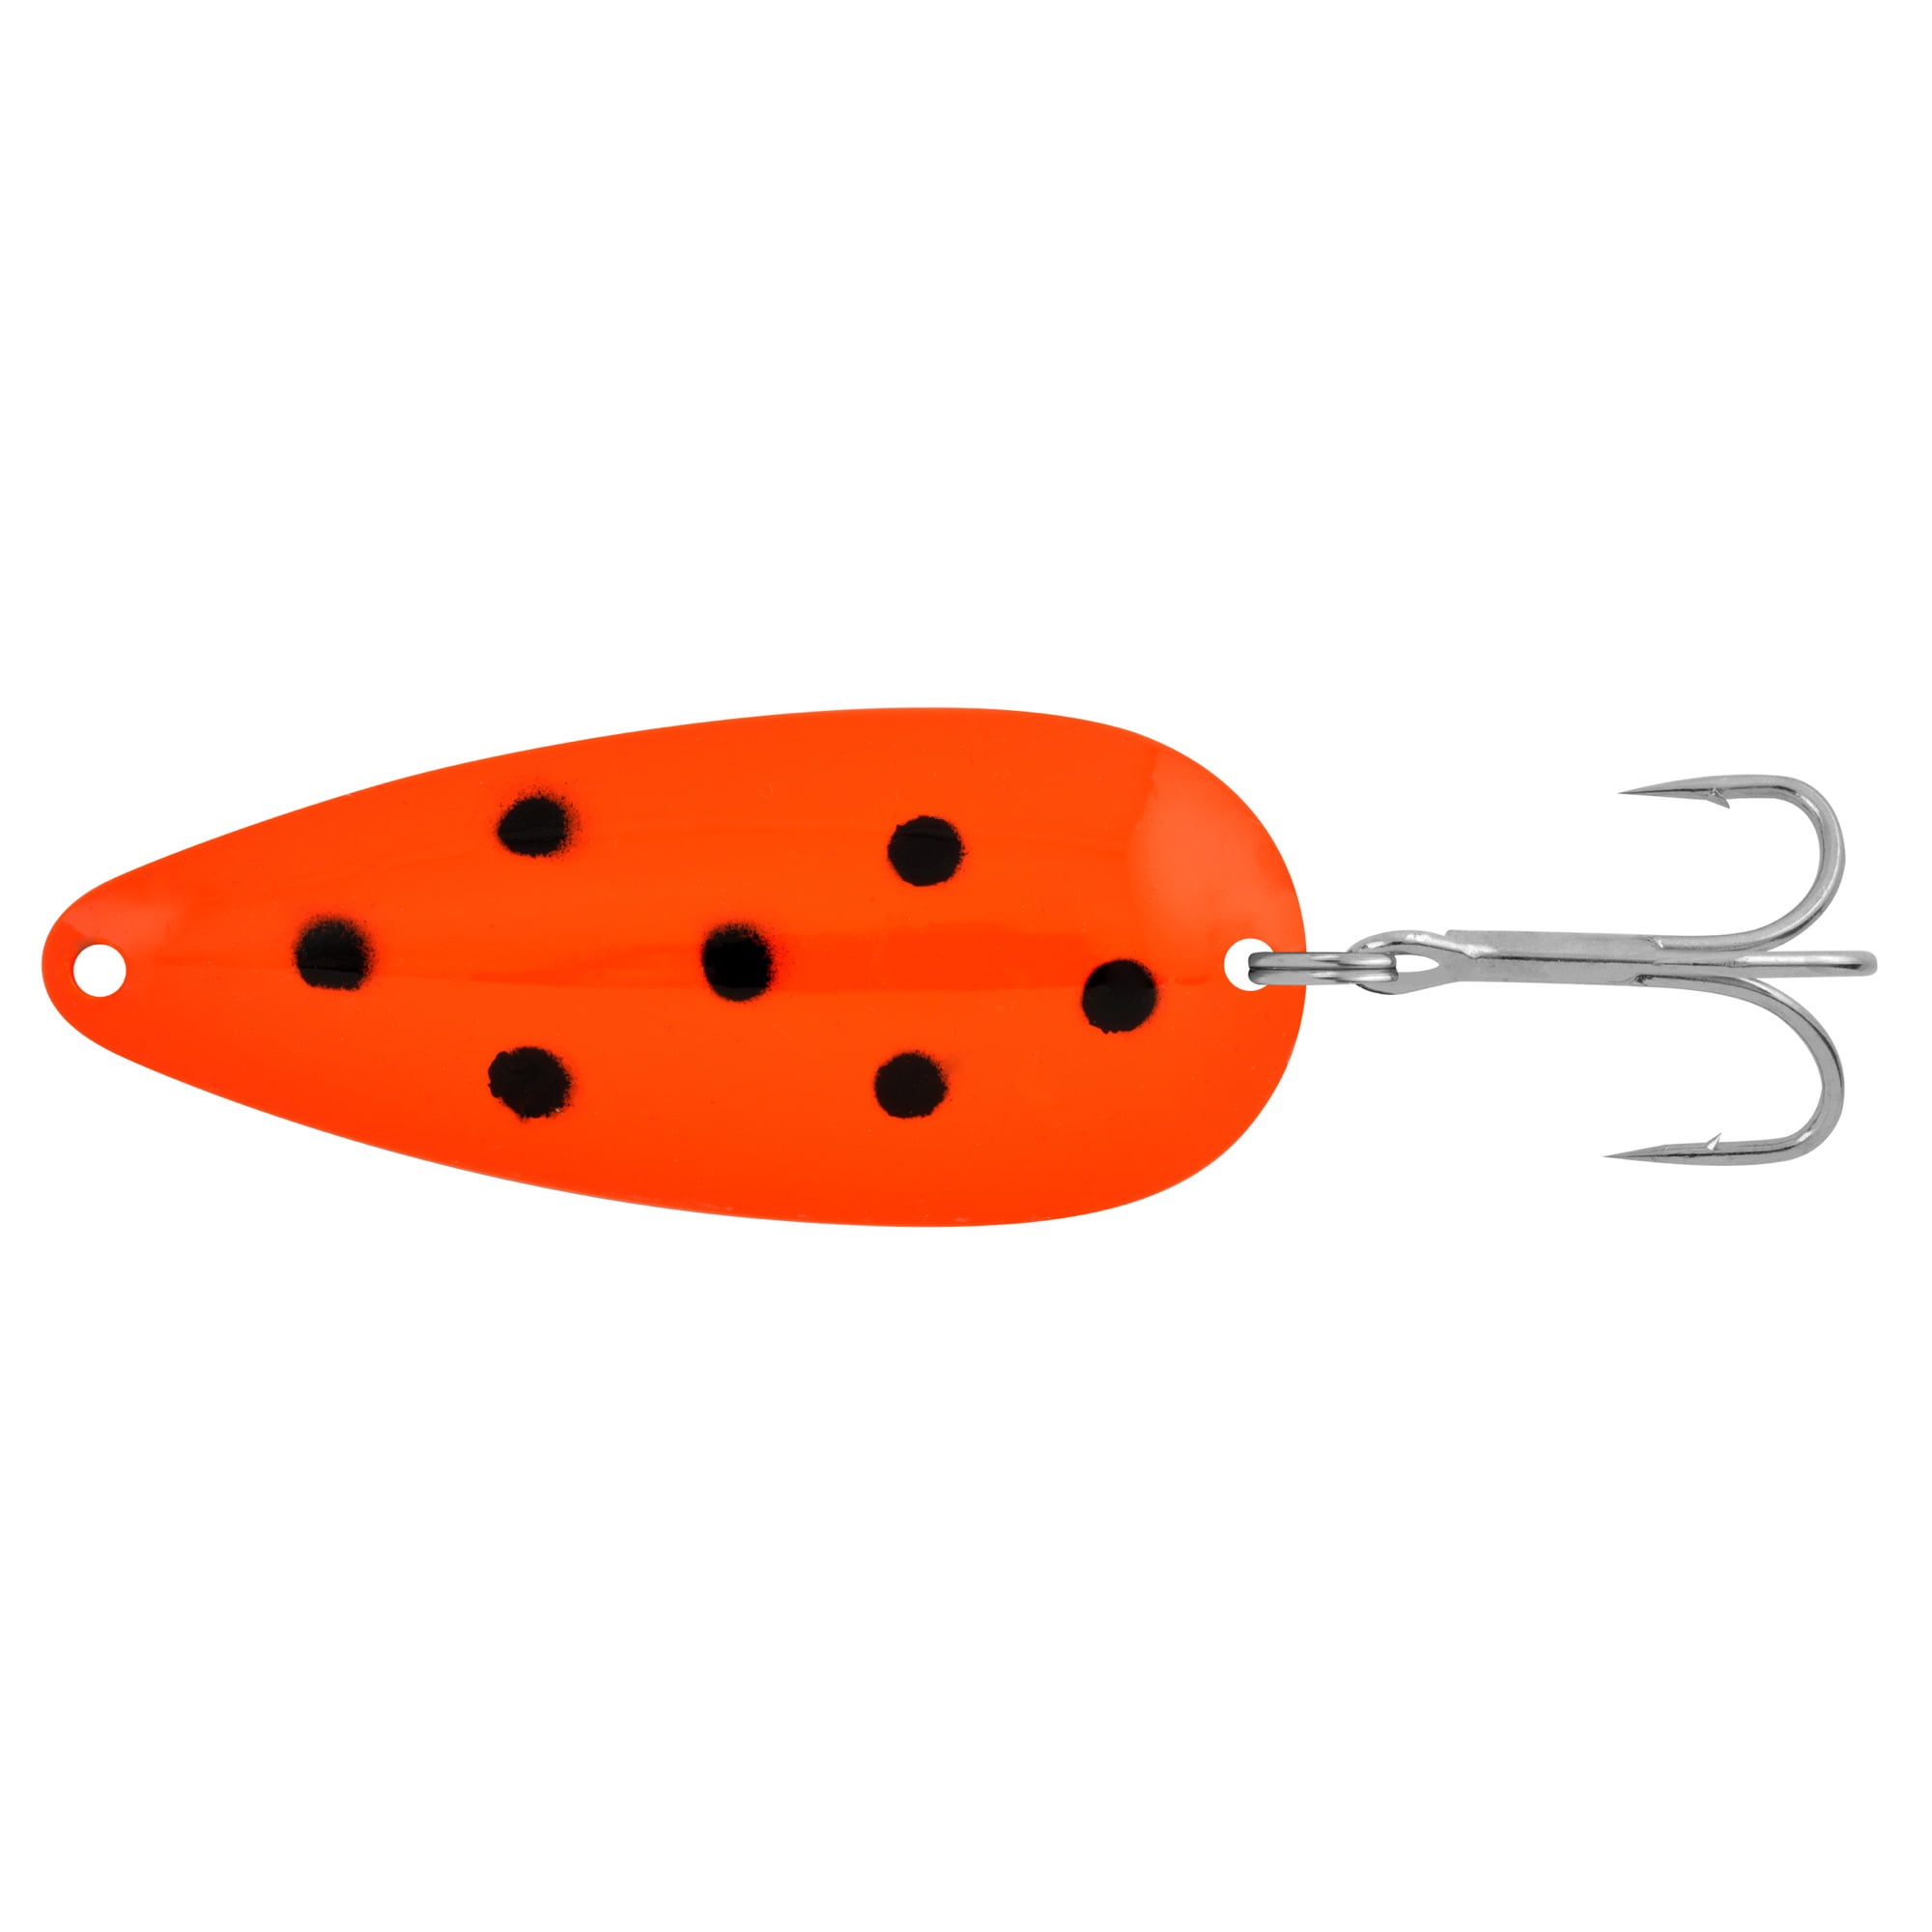 Apex Tackle Gamefish Spoon Red/White 1/2 oz., Fishing Spoons 